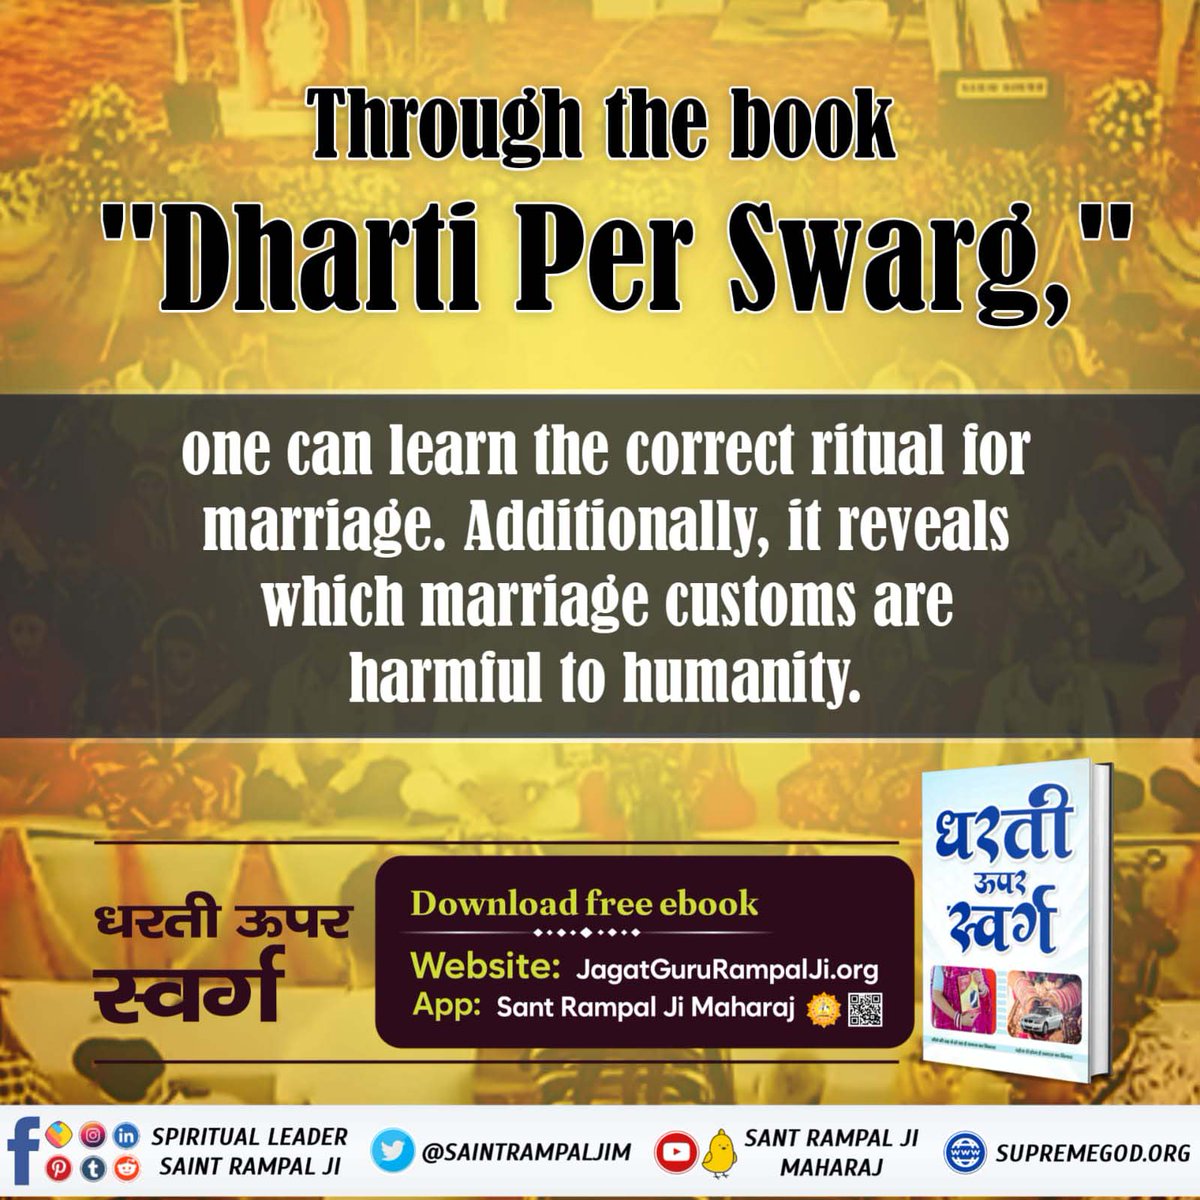 #धरती_को_स्वर्ग_बनाना_है
Through the book 
'Dharti Per Swarg'
One can learn the correct ritual for marriage.Additionally,
it reveals which marriage customs are harmful to humanity.

🙏
-@SaintRampalJiM 

👇
#SUNDAYSPECIALSATSANG 
#Sunday